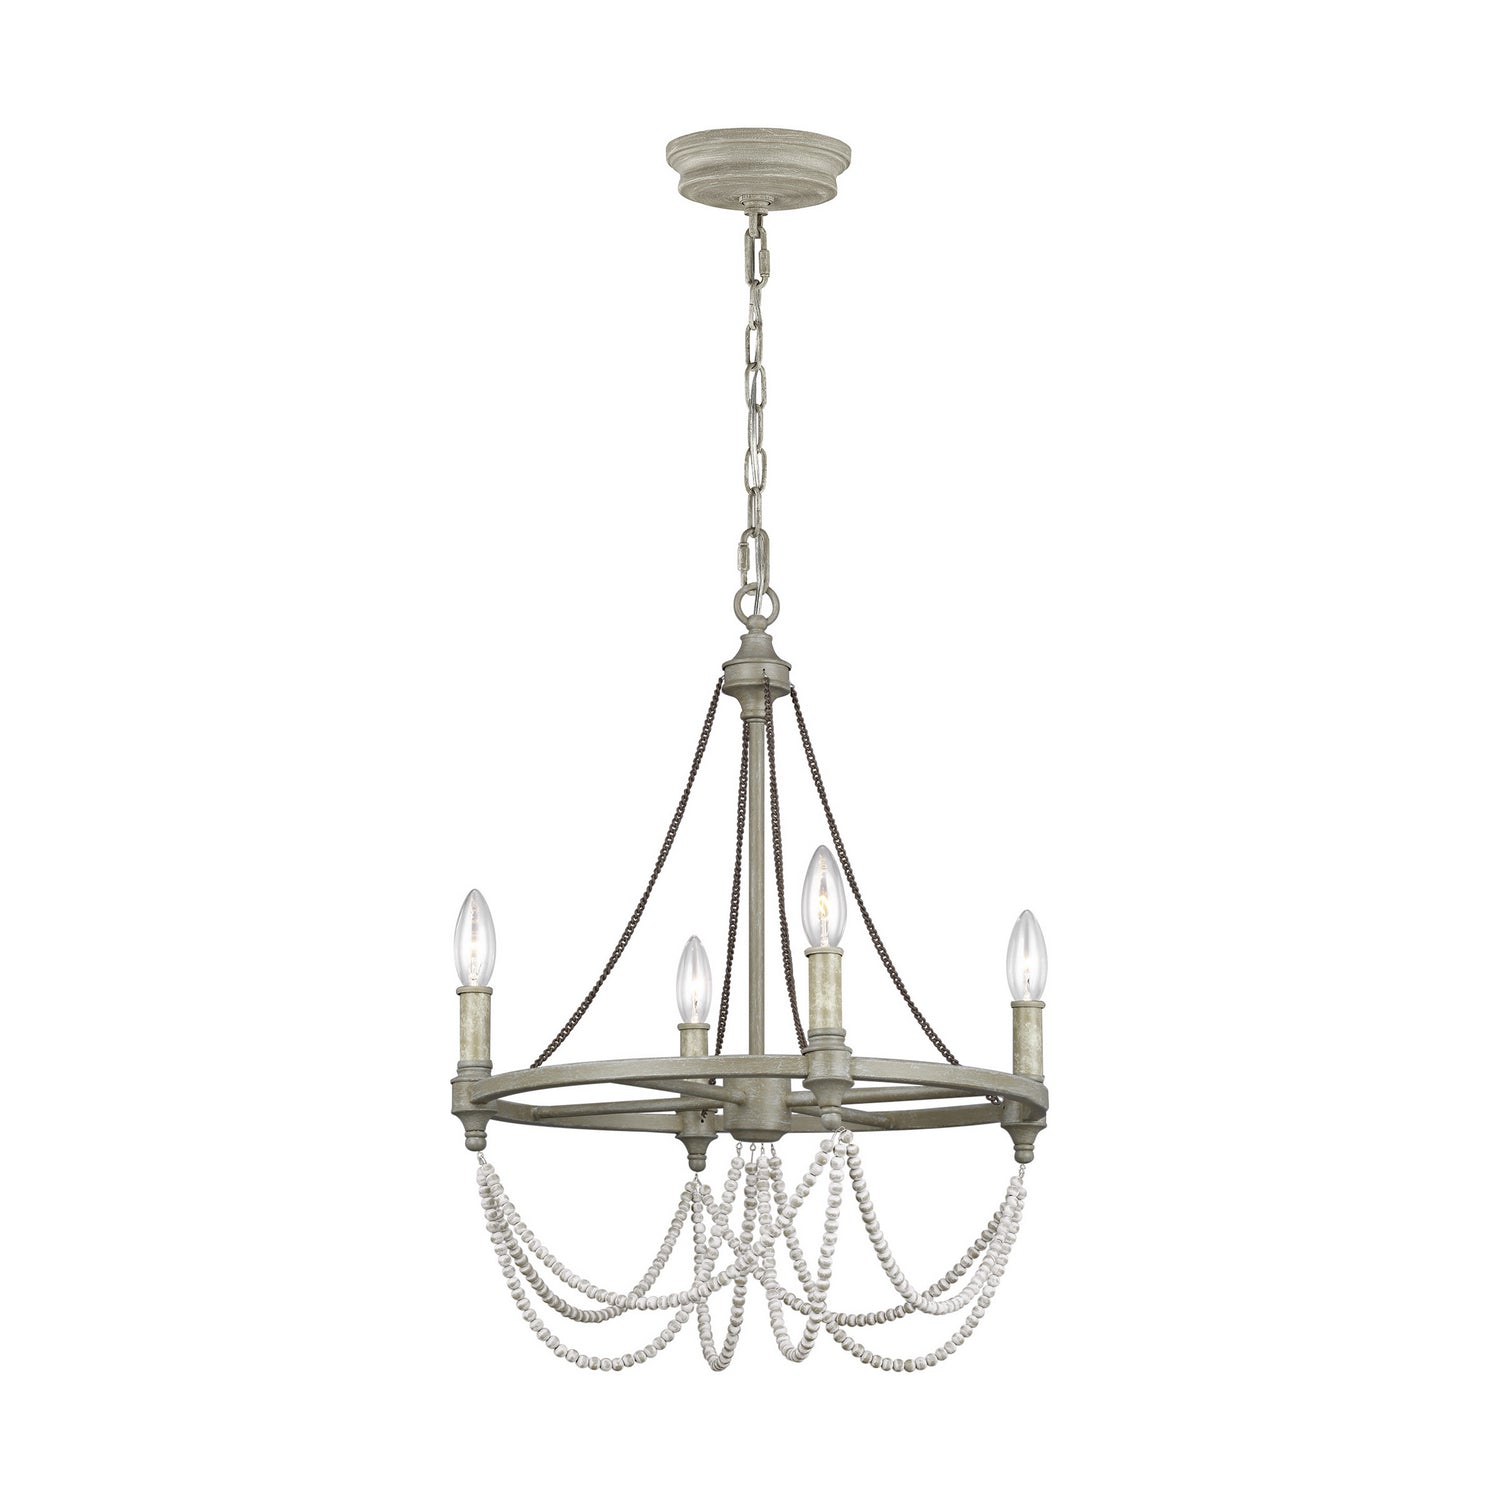 Visual Comfort Studio Canada - F3331/4FWO/DWW - Four Light Chandelier - Beverly - French Washed Oak / Distressed White Wood